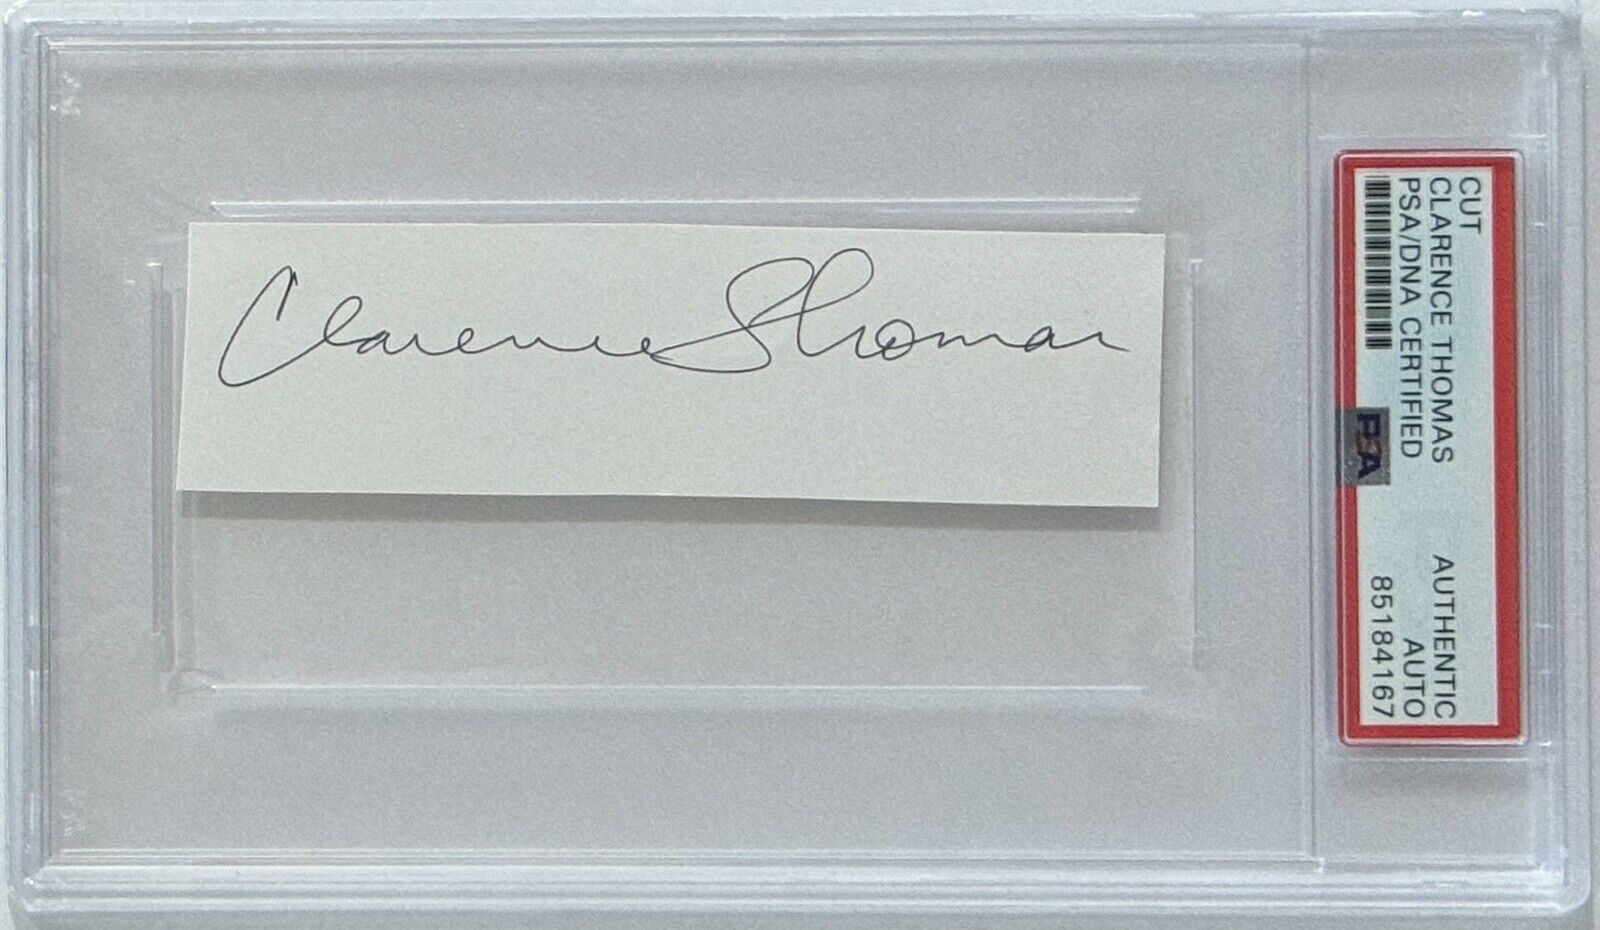 SUPREME COURT JUSTICE CLARENCE THOMAS AUTOGRAPHED CUT PSA DNA COA CERTIFIED